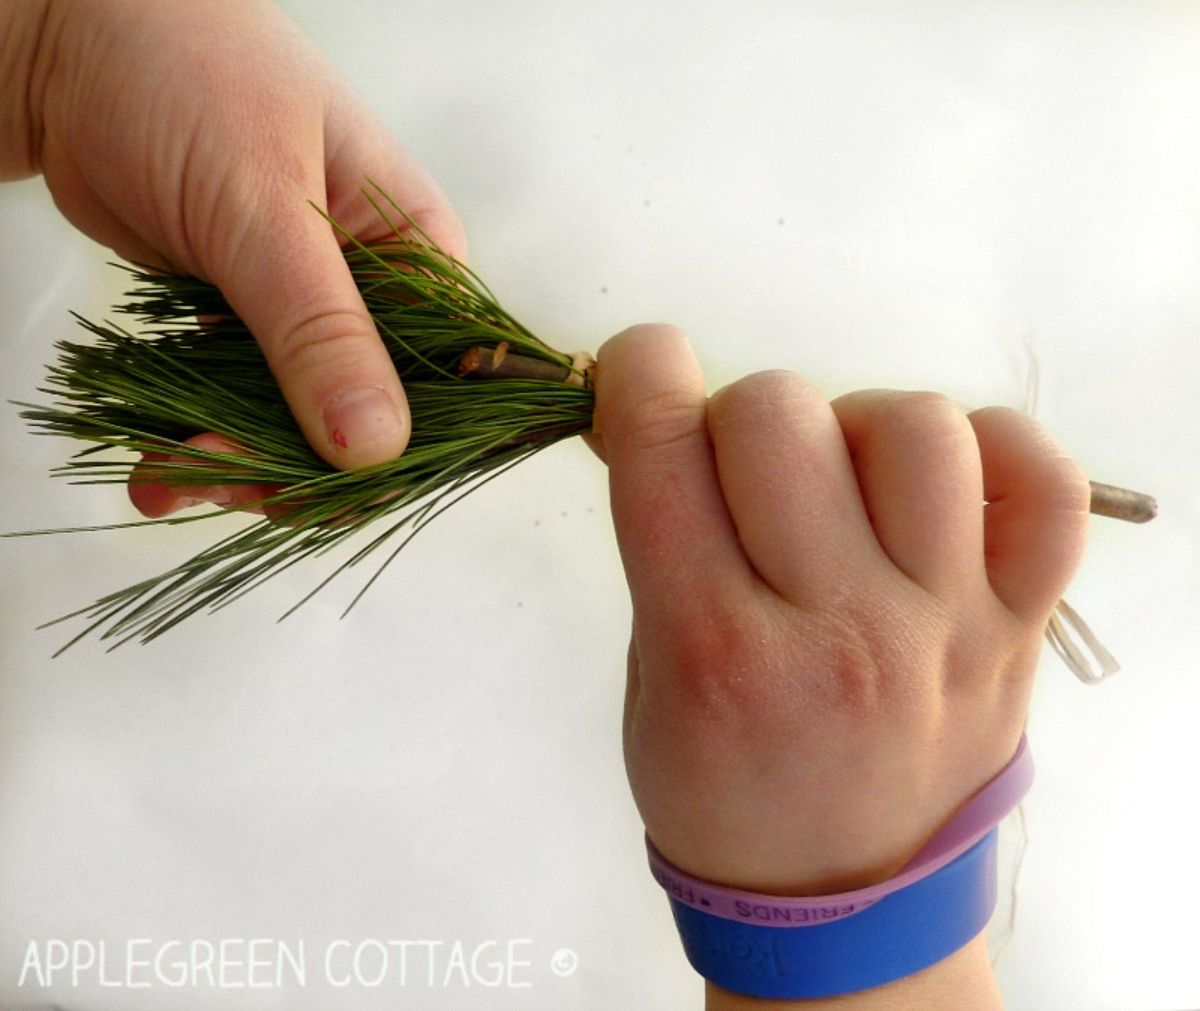 a young child's hands holds a branch and some pine needles